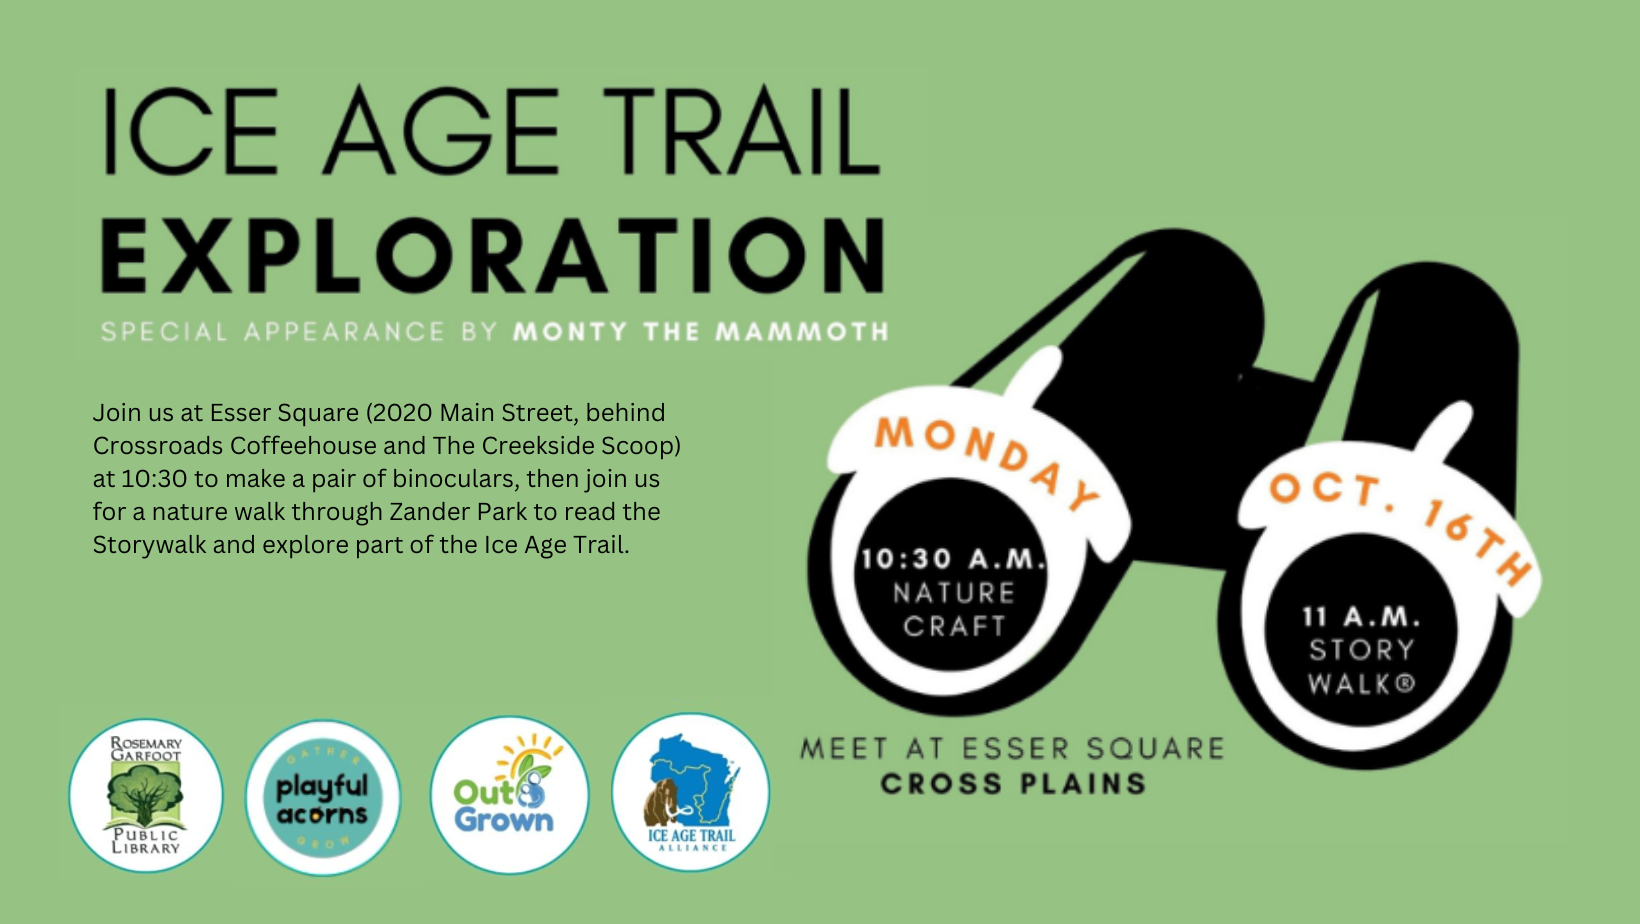 Ice Age Trail Exploration, October 16 at 10:30am